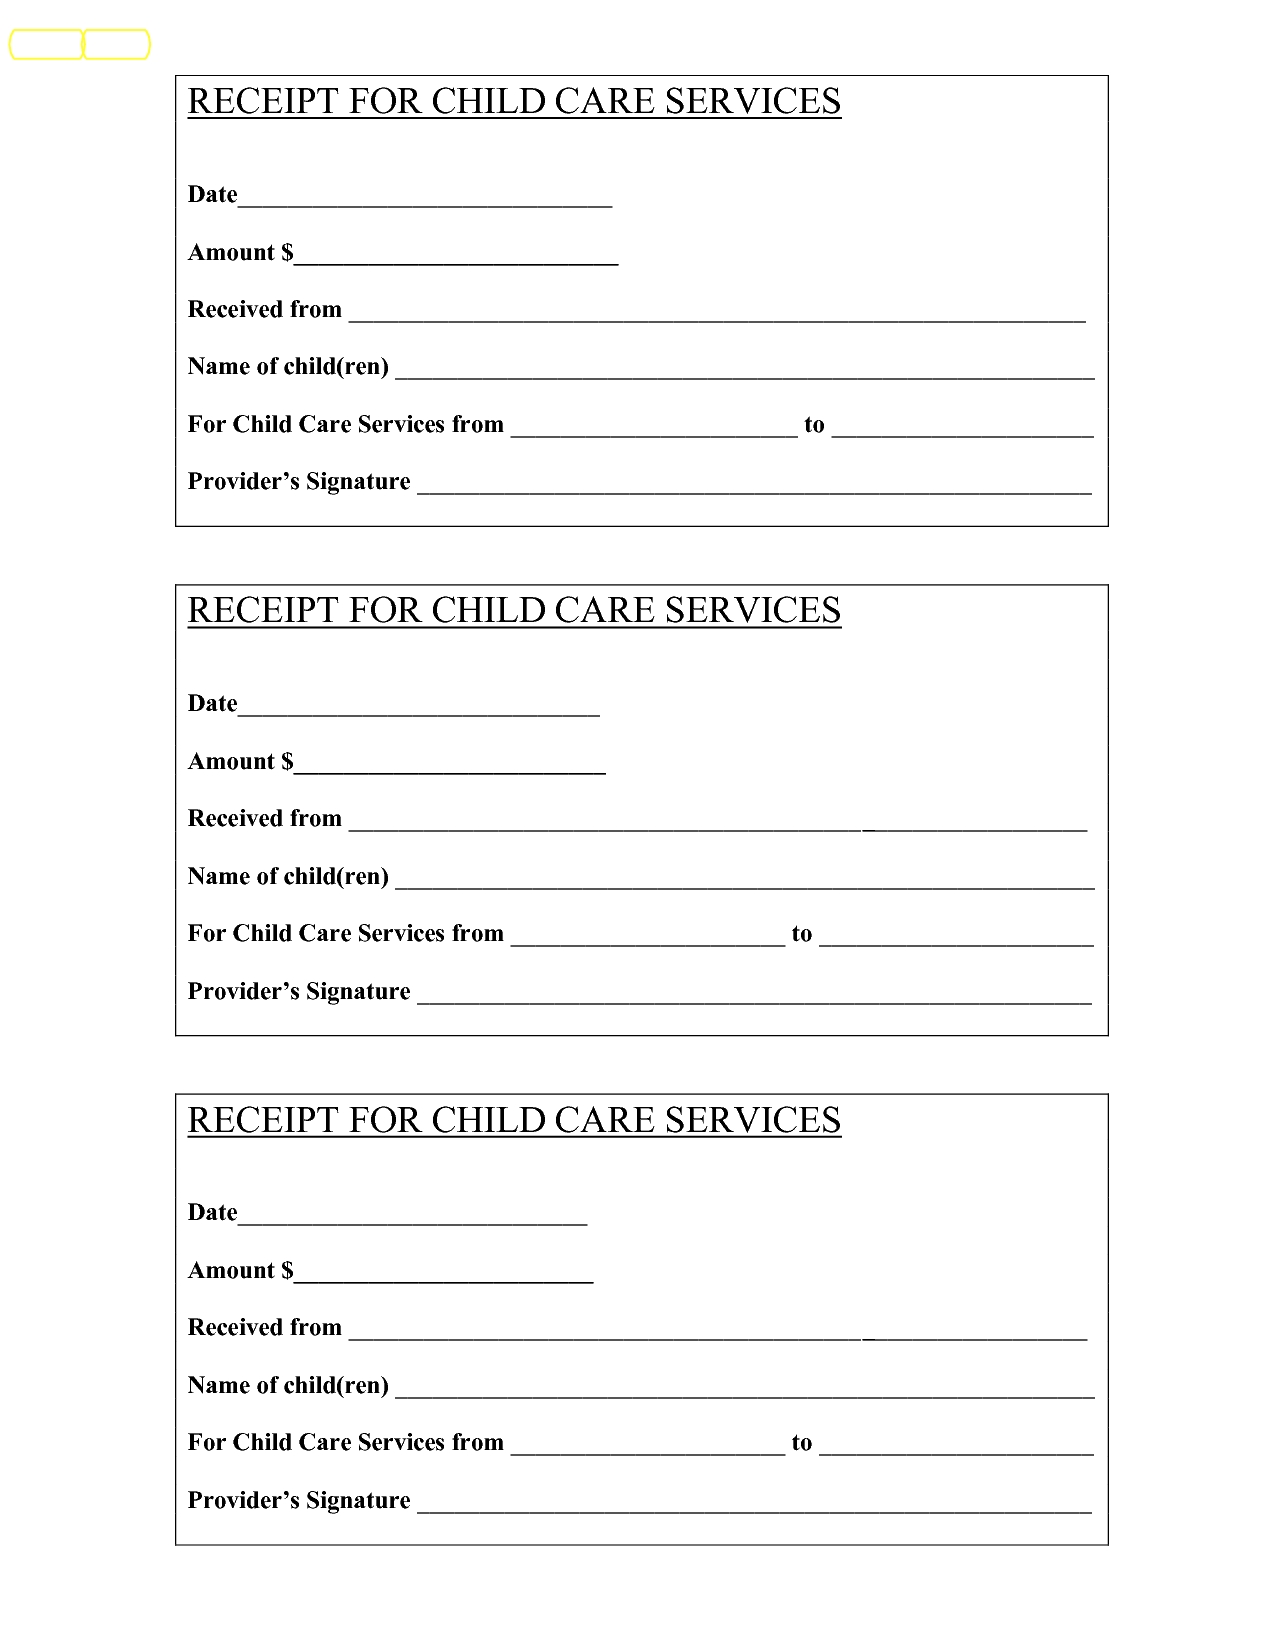 Child Care Receipt Template Free